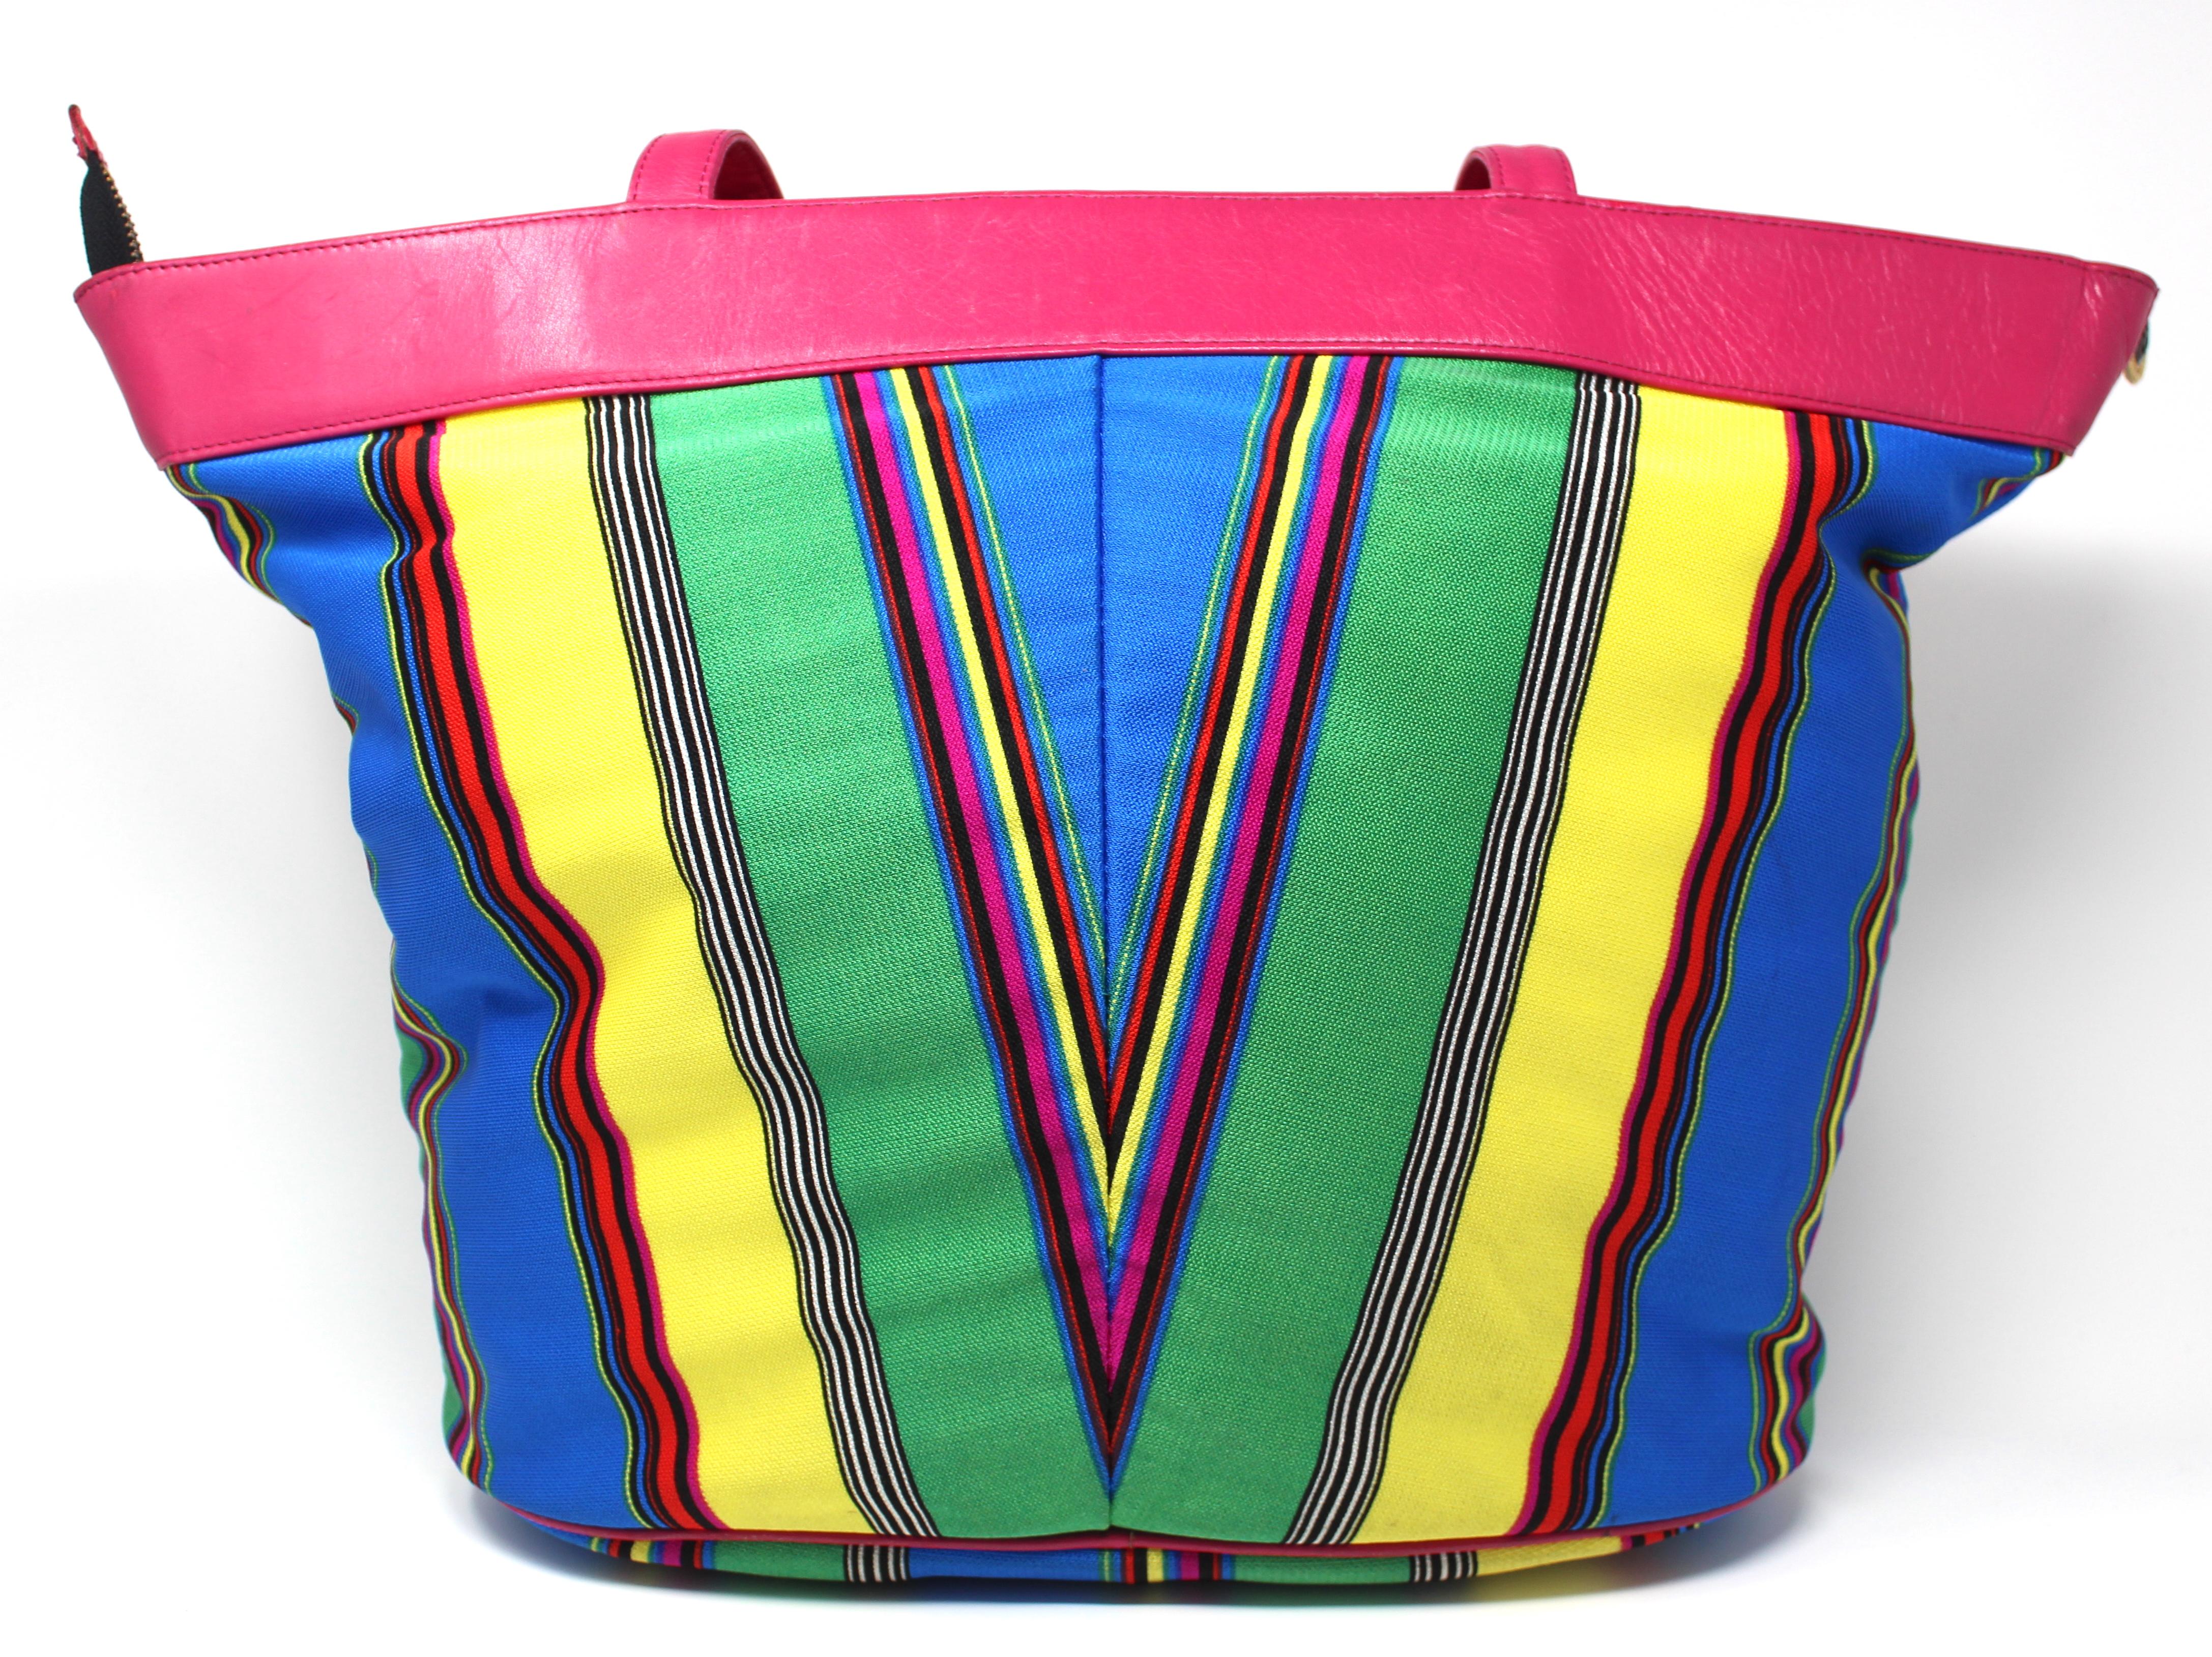 Gianni Versace Multicolored Large Tote, c. 90's  For Sale 3